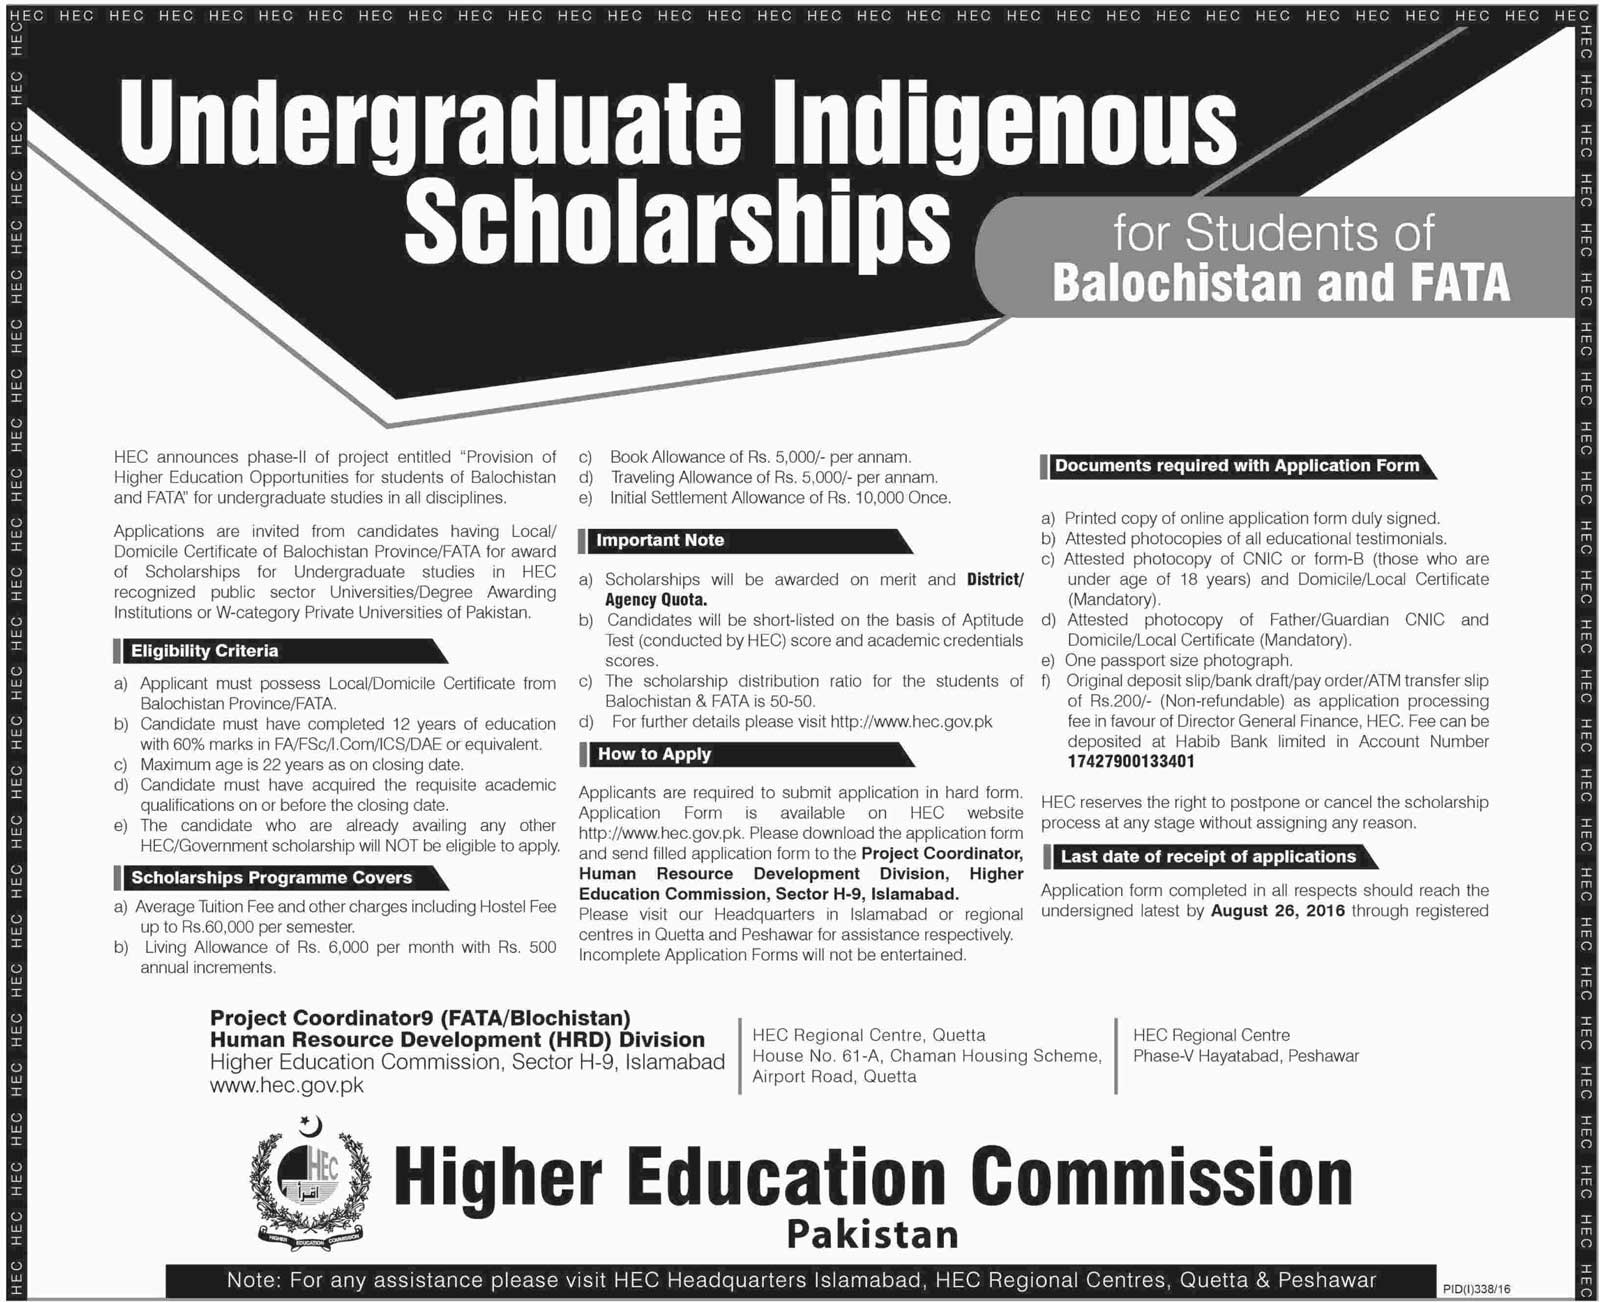 Undergraduate Indigenous Scholarships for Students of Balochsitan and FATA